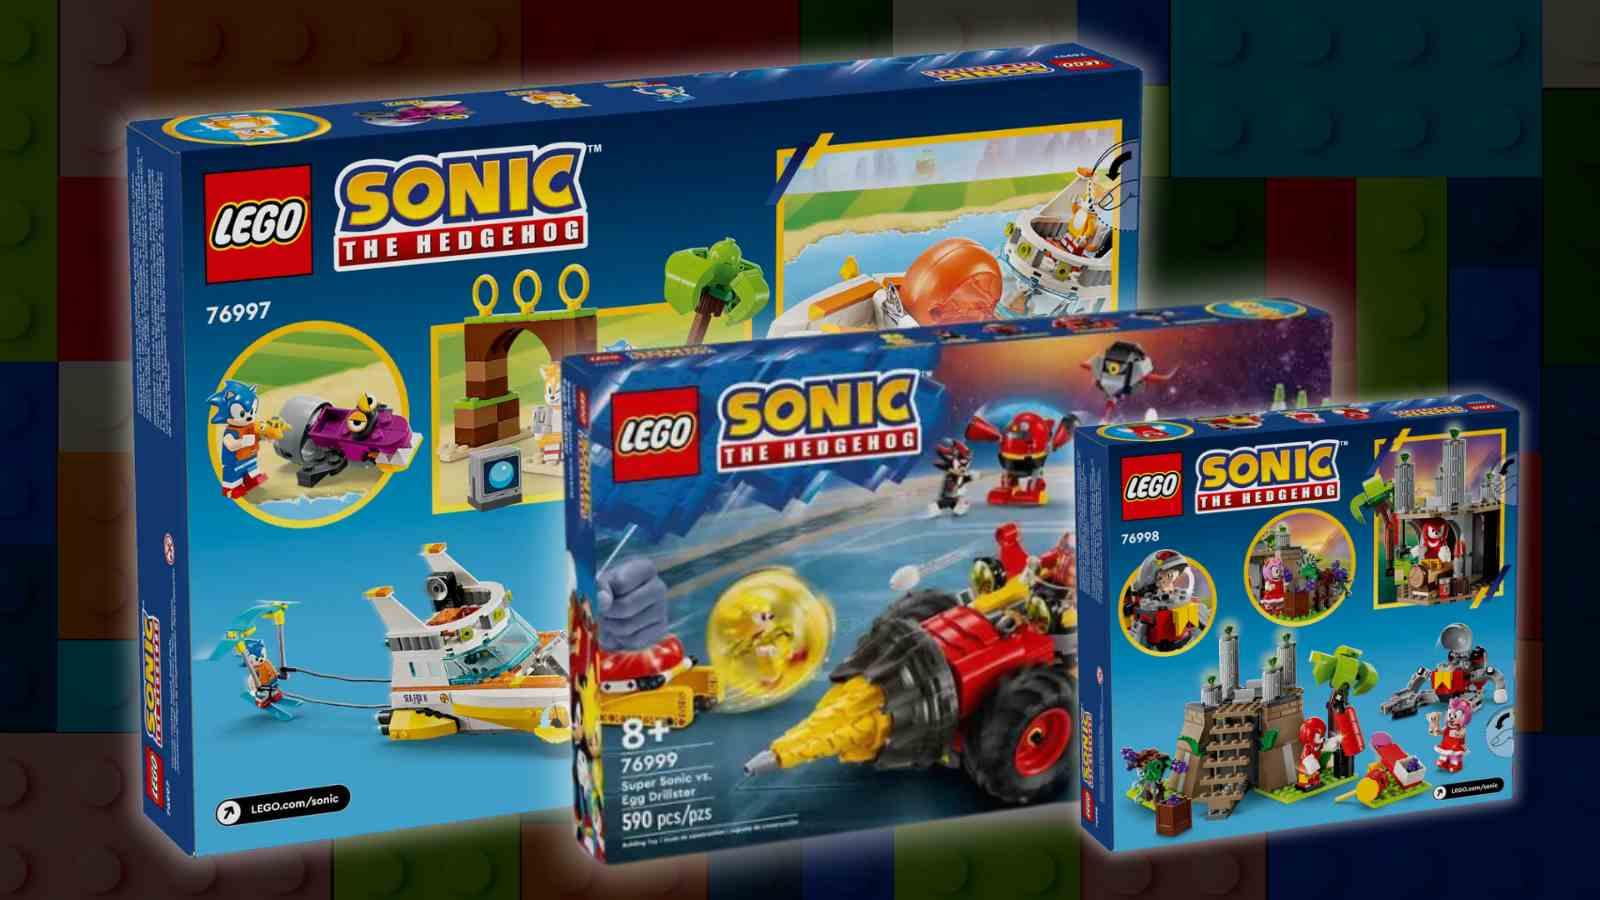 The upcoming LEGO Sonic sets on a LEGO background